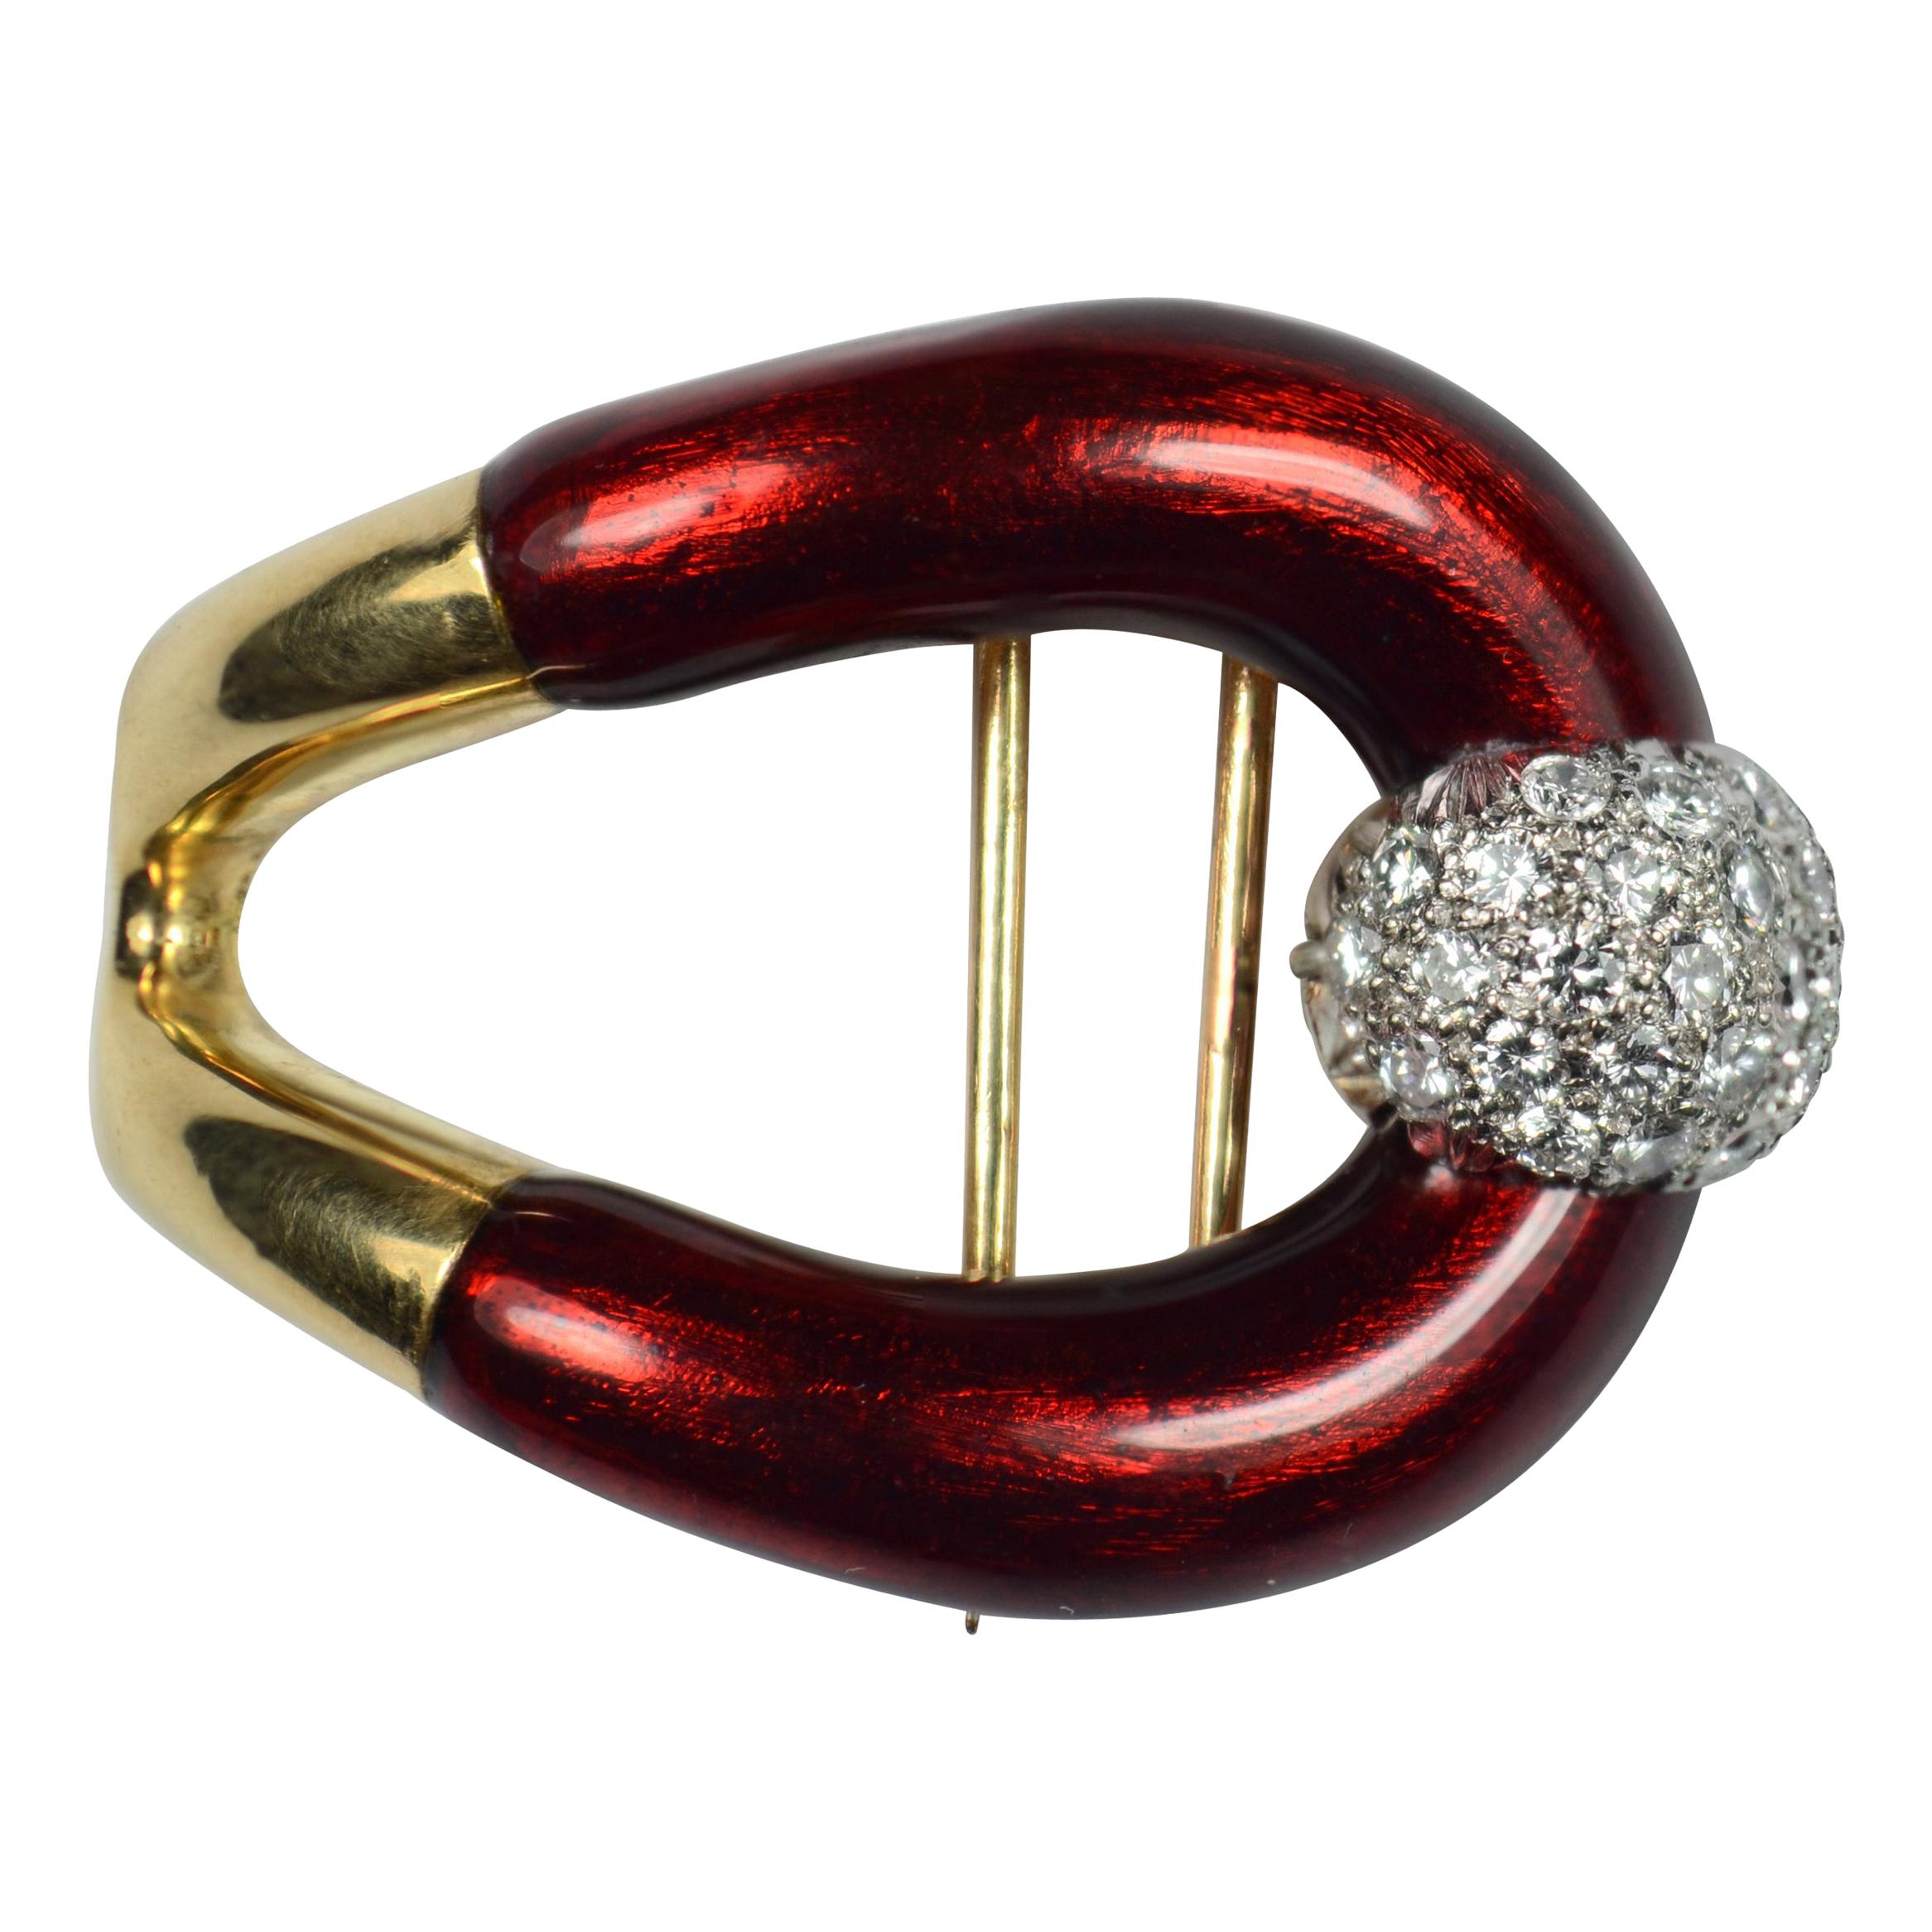 Vourakis Rote Emaille-Diamant-Goldschnalle-Brosche